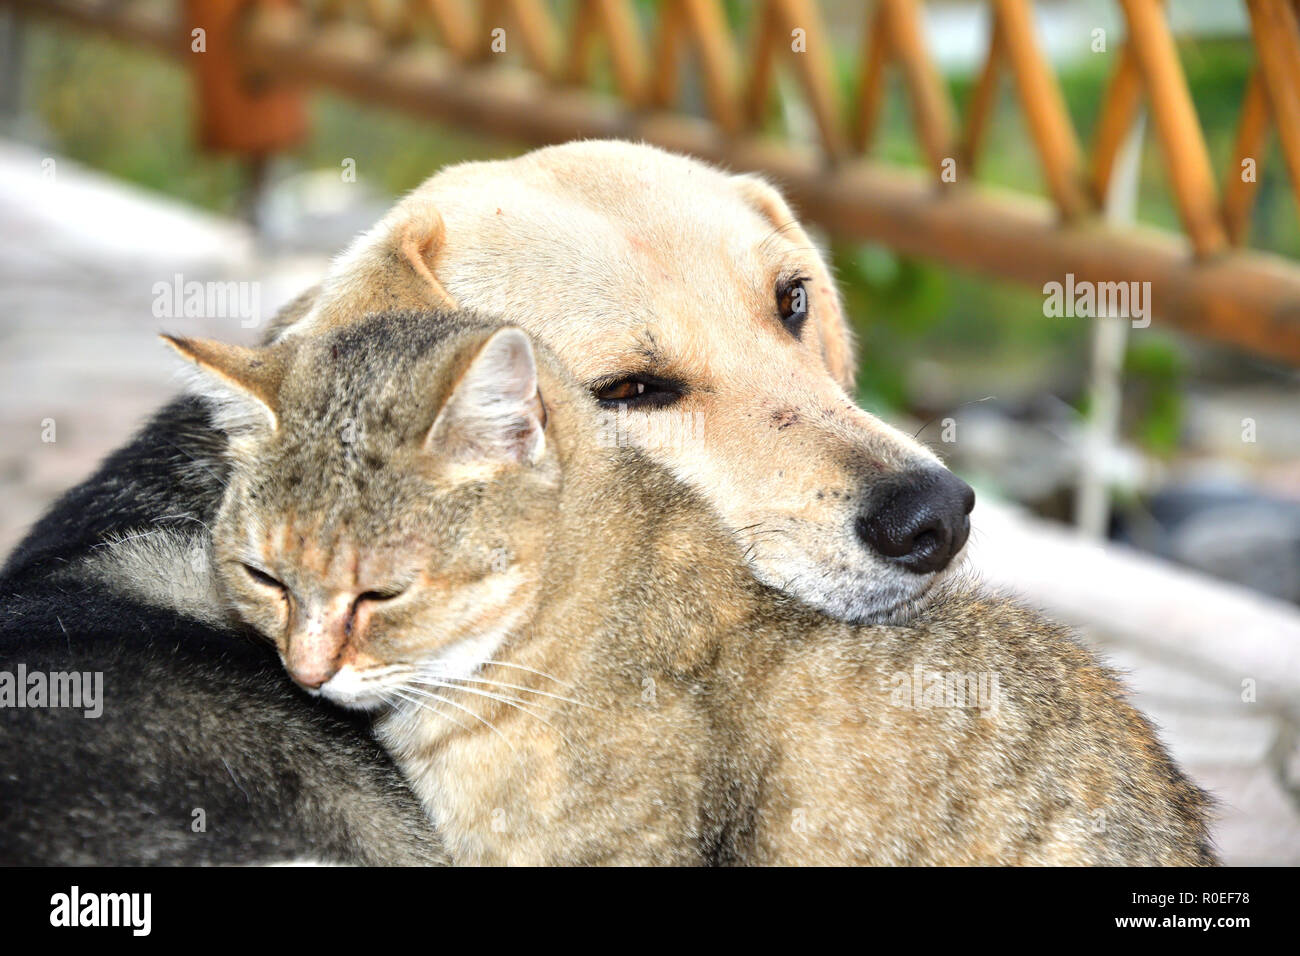 Dog and cat to snuggle in animal love best friends Stock Photo - Alamy